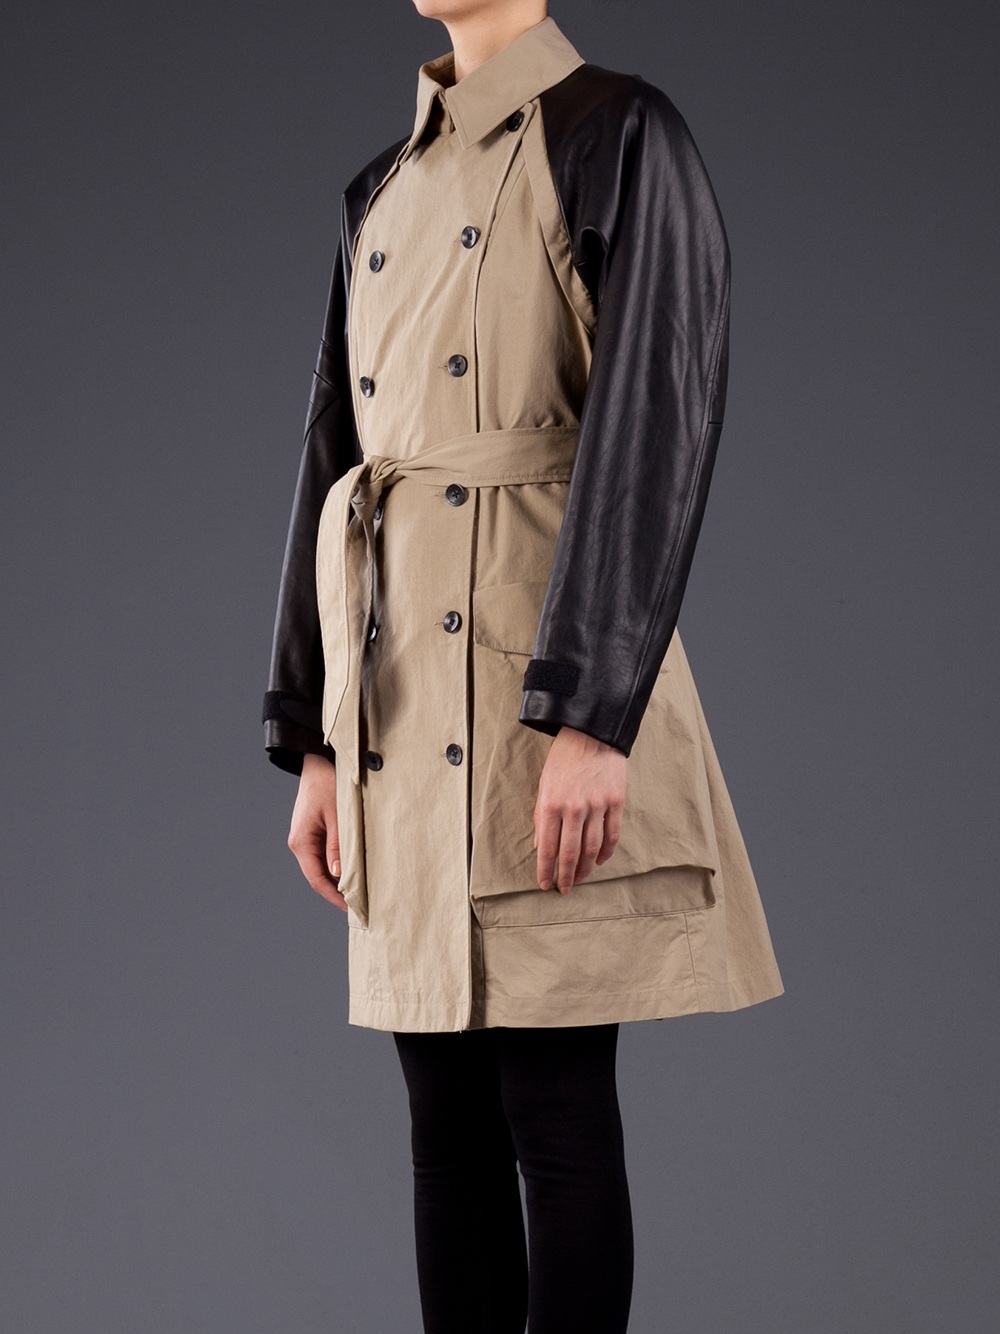 Rag & bone Khaki Trench Coat With Leather Sleeves in Natural | Lyst